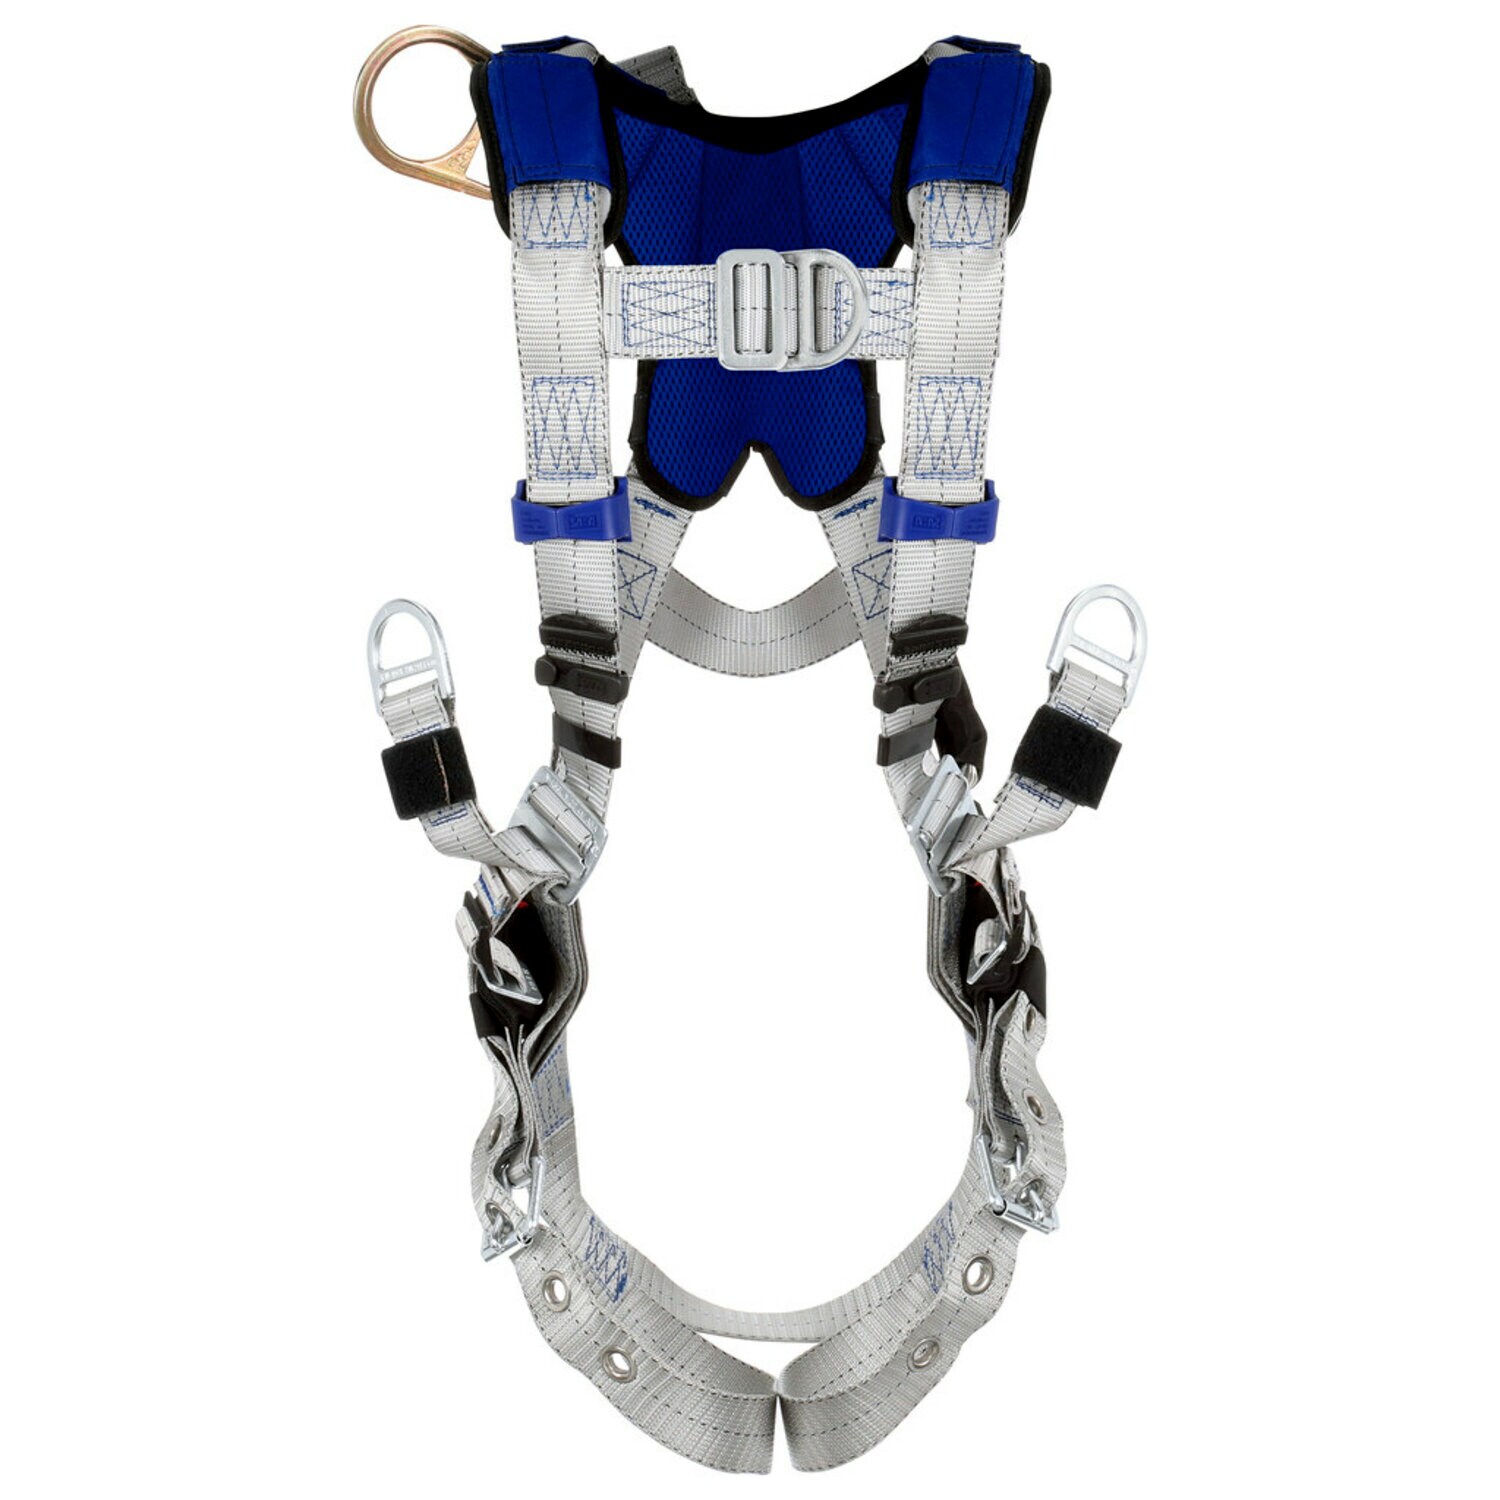 7012817632 - 3M DBI-SALA ExoFit X100 Comfort Oil & Gas Climbing/Positioning/Suspension Safety Harness 1401150, Small